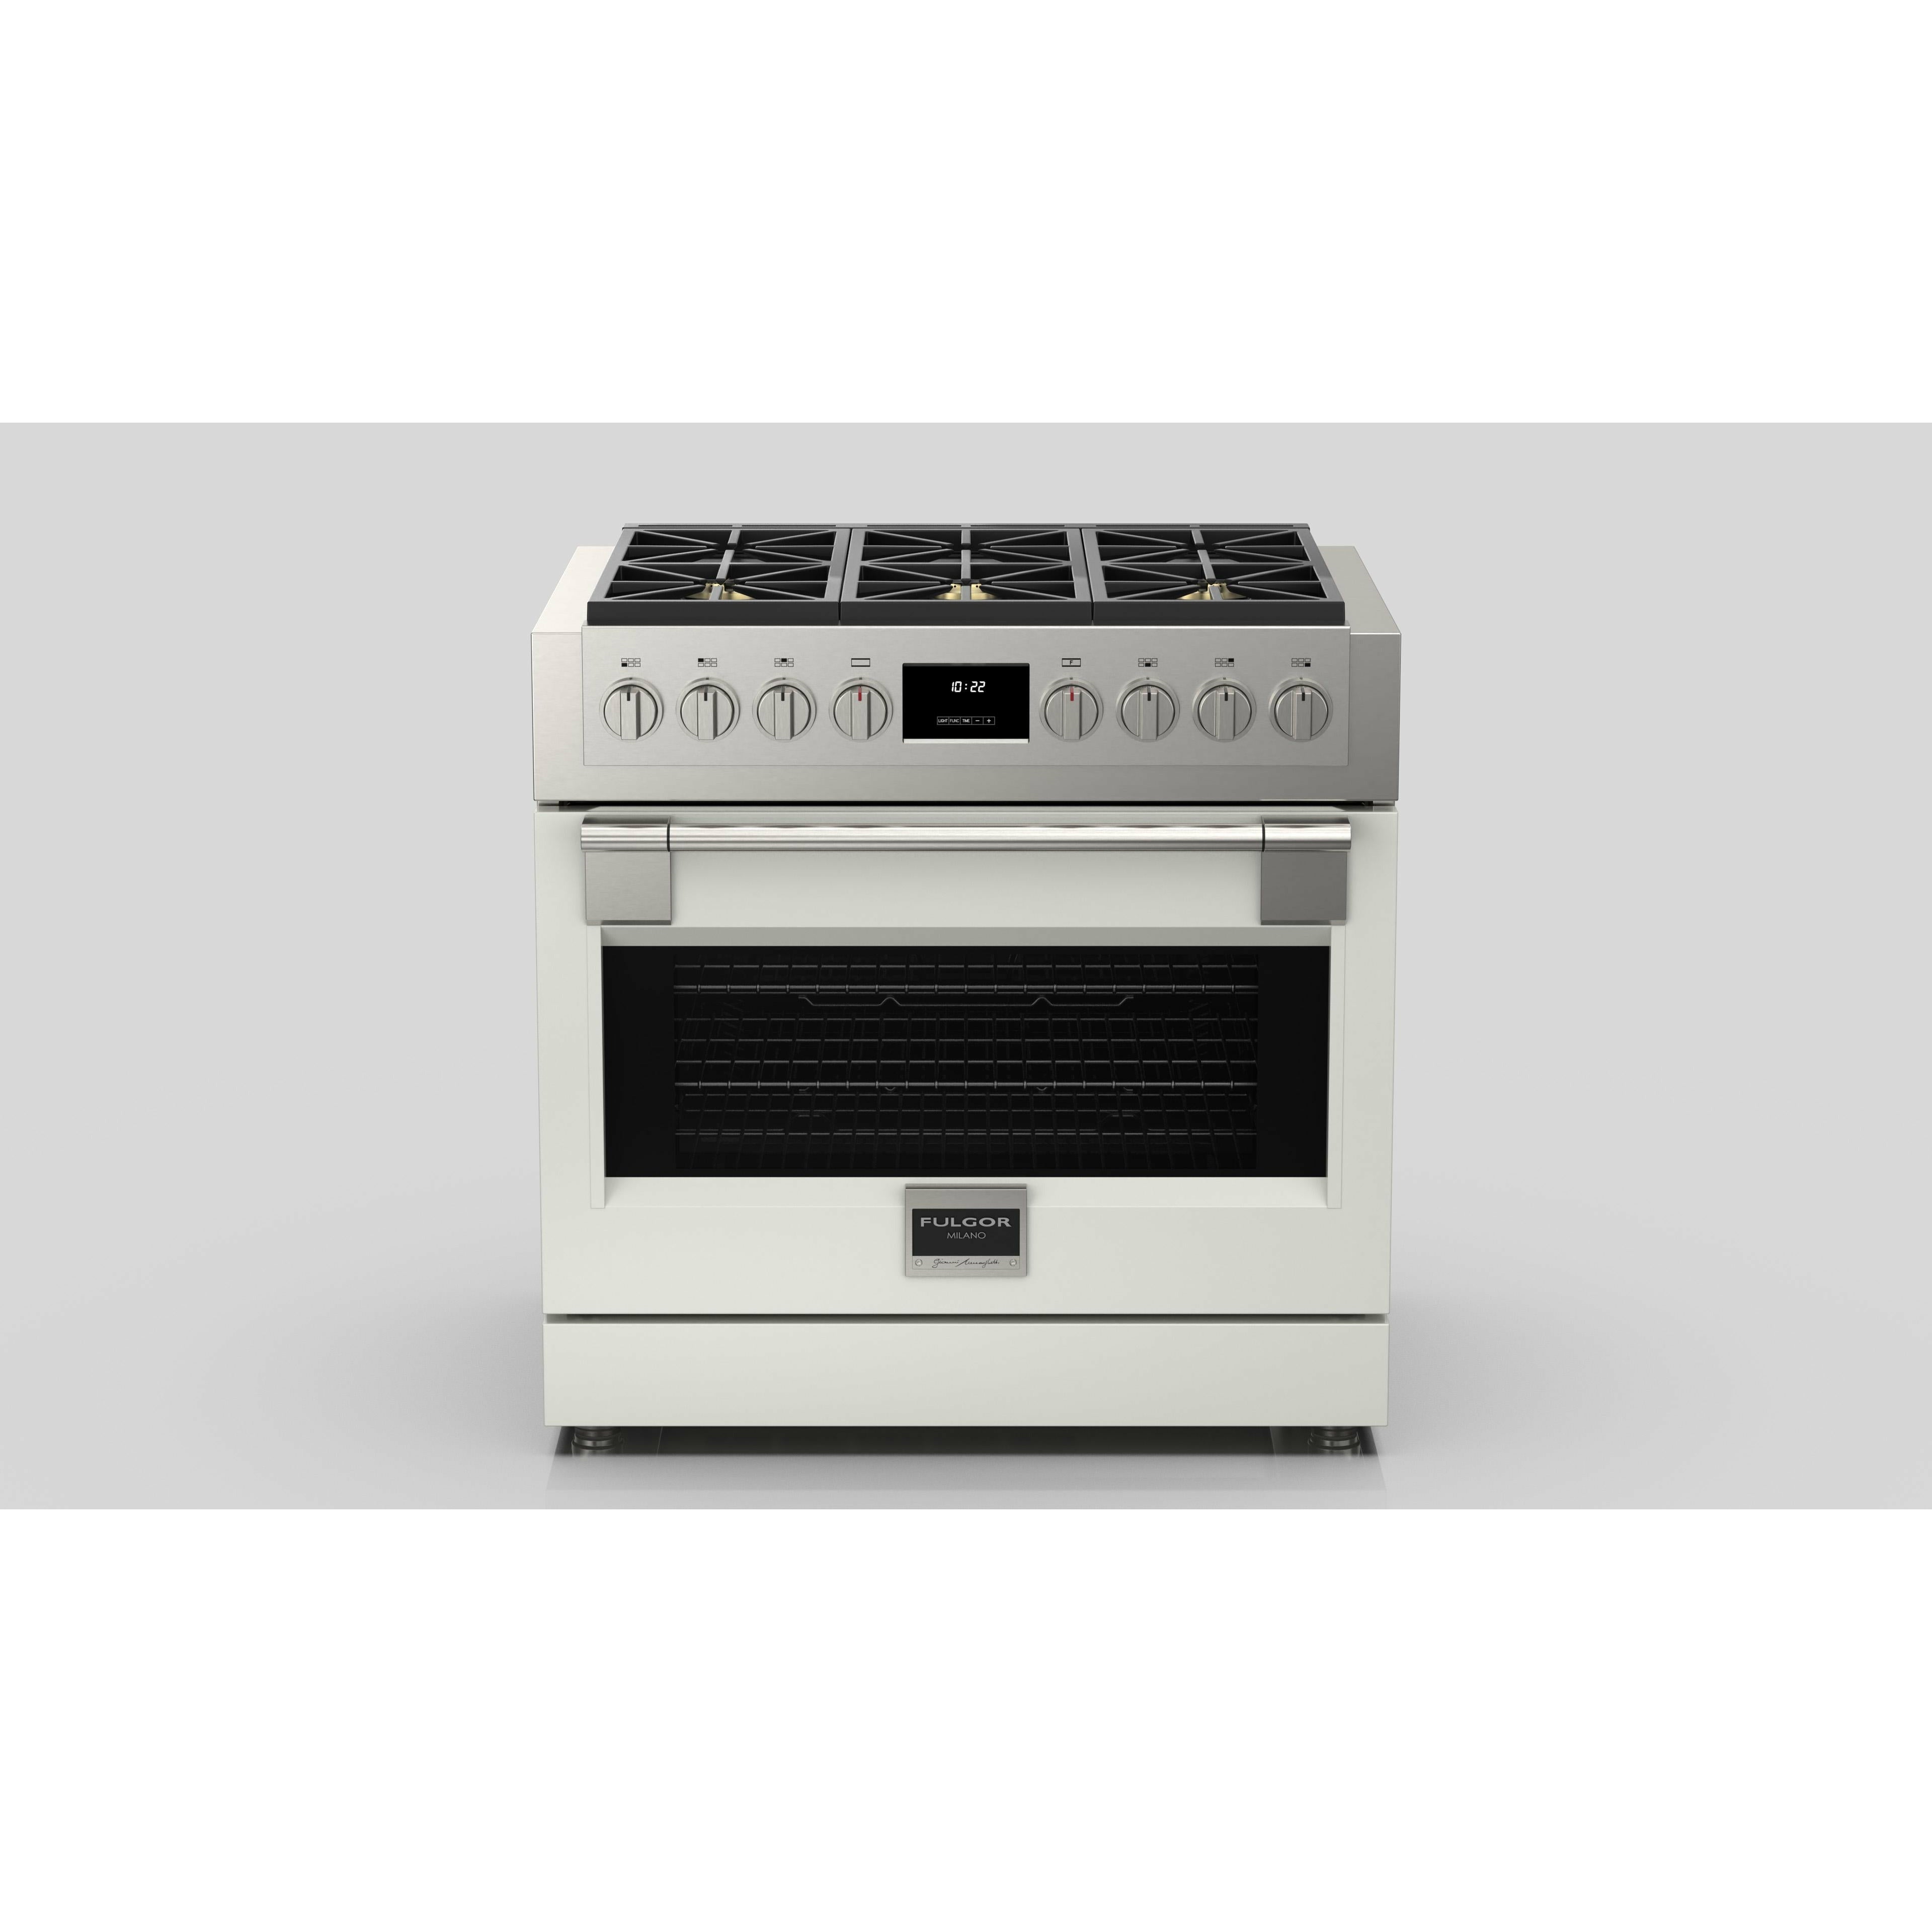 Fulgor Milano 36" Professional Gas Range with 6 Dual-Flame Burners, 5.7 cu. ft. Capacity, Stainless Steel - F6PGR366S2